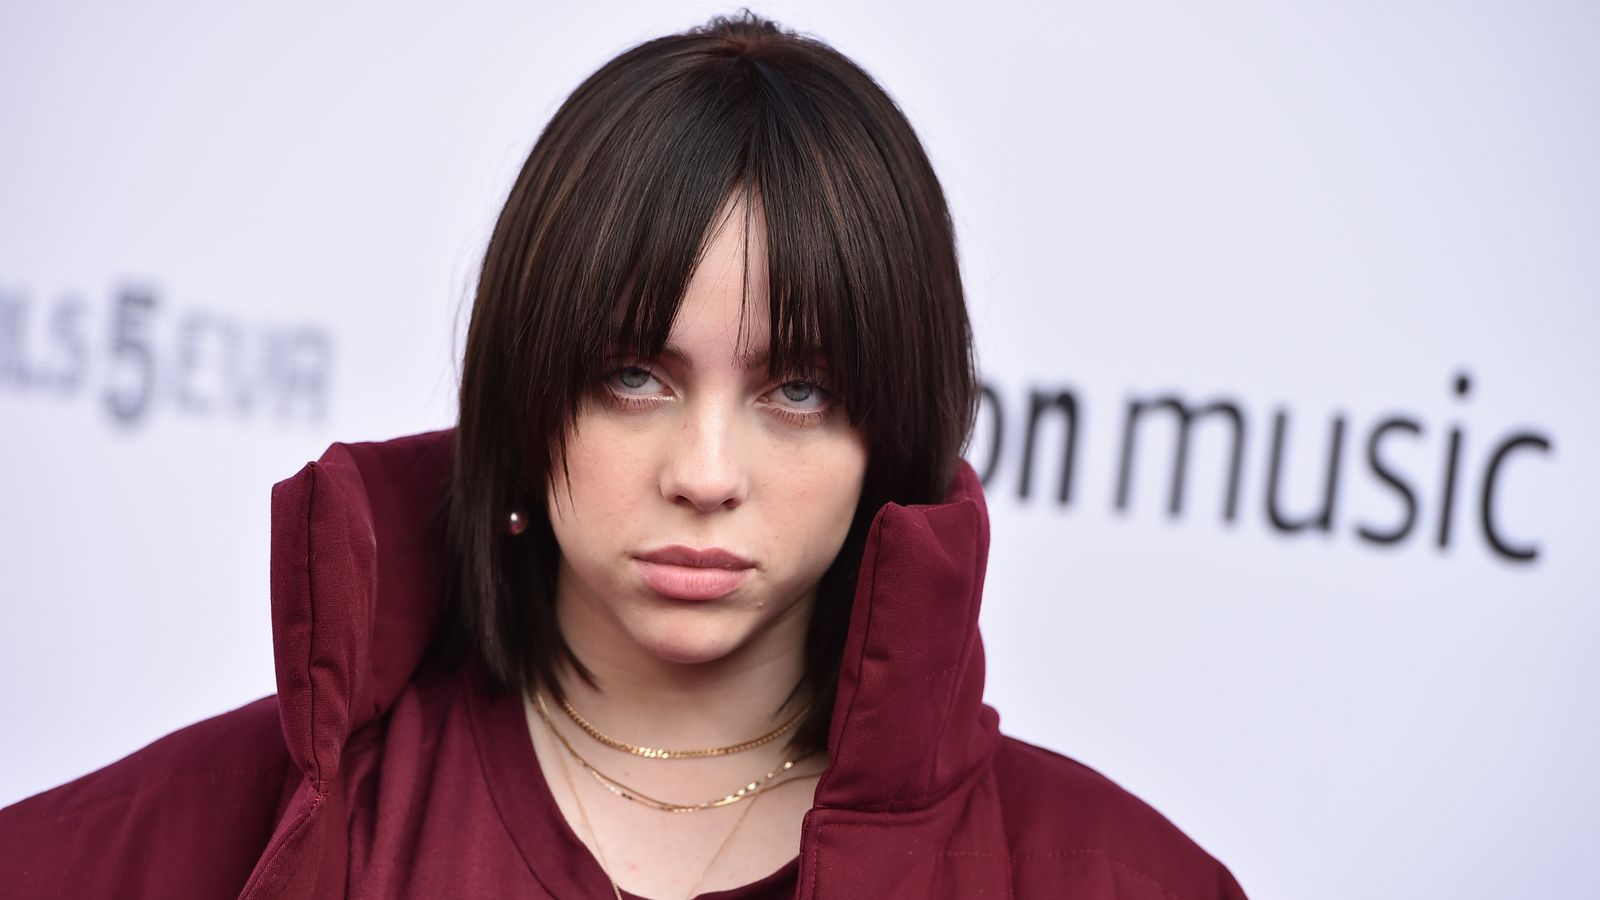 Billie Eilish says watching porn from age 11 'really destroyed my brain